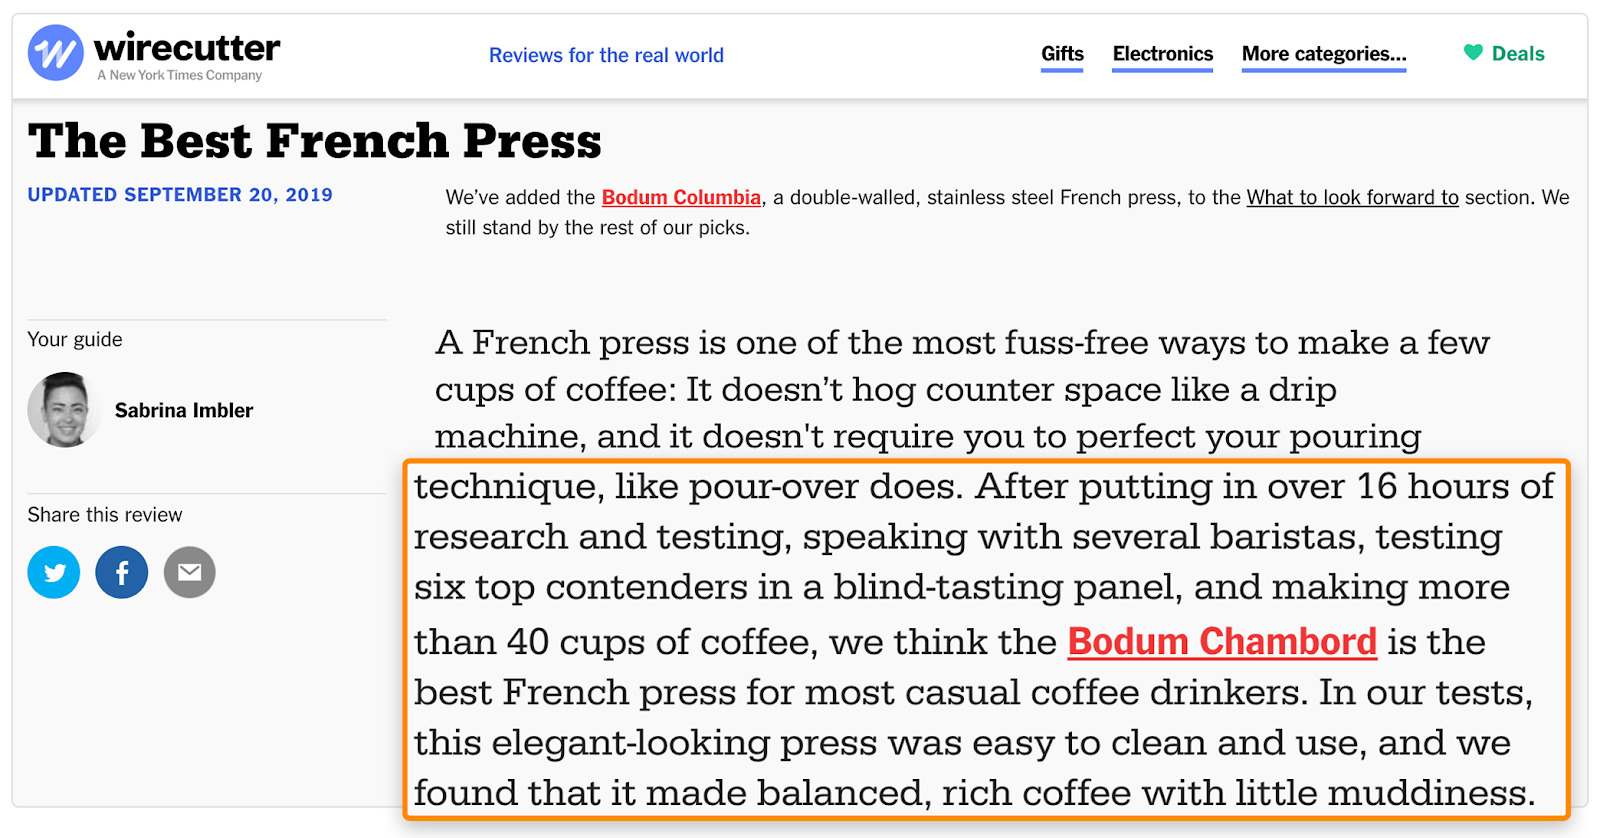 wirecutter review best french press 2